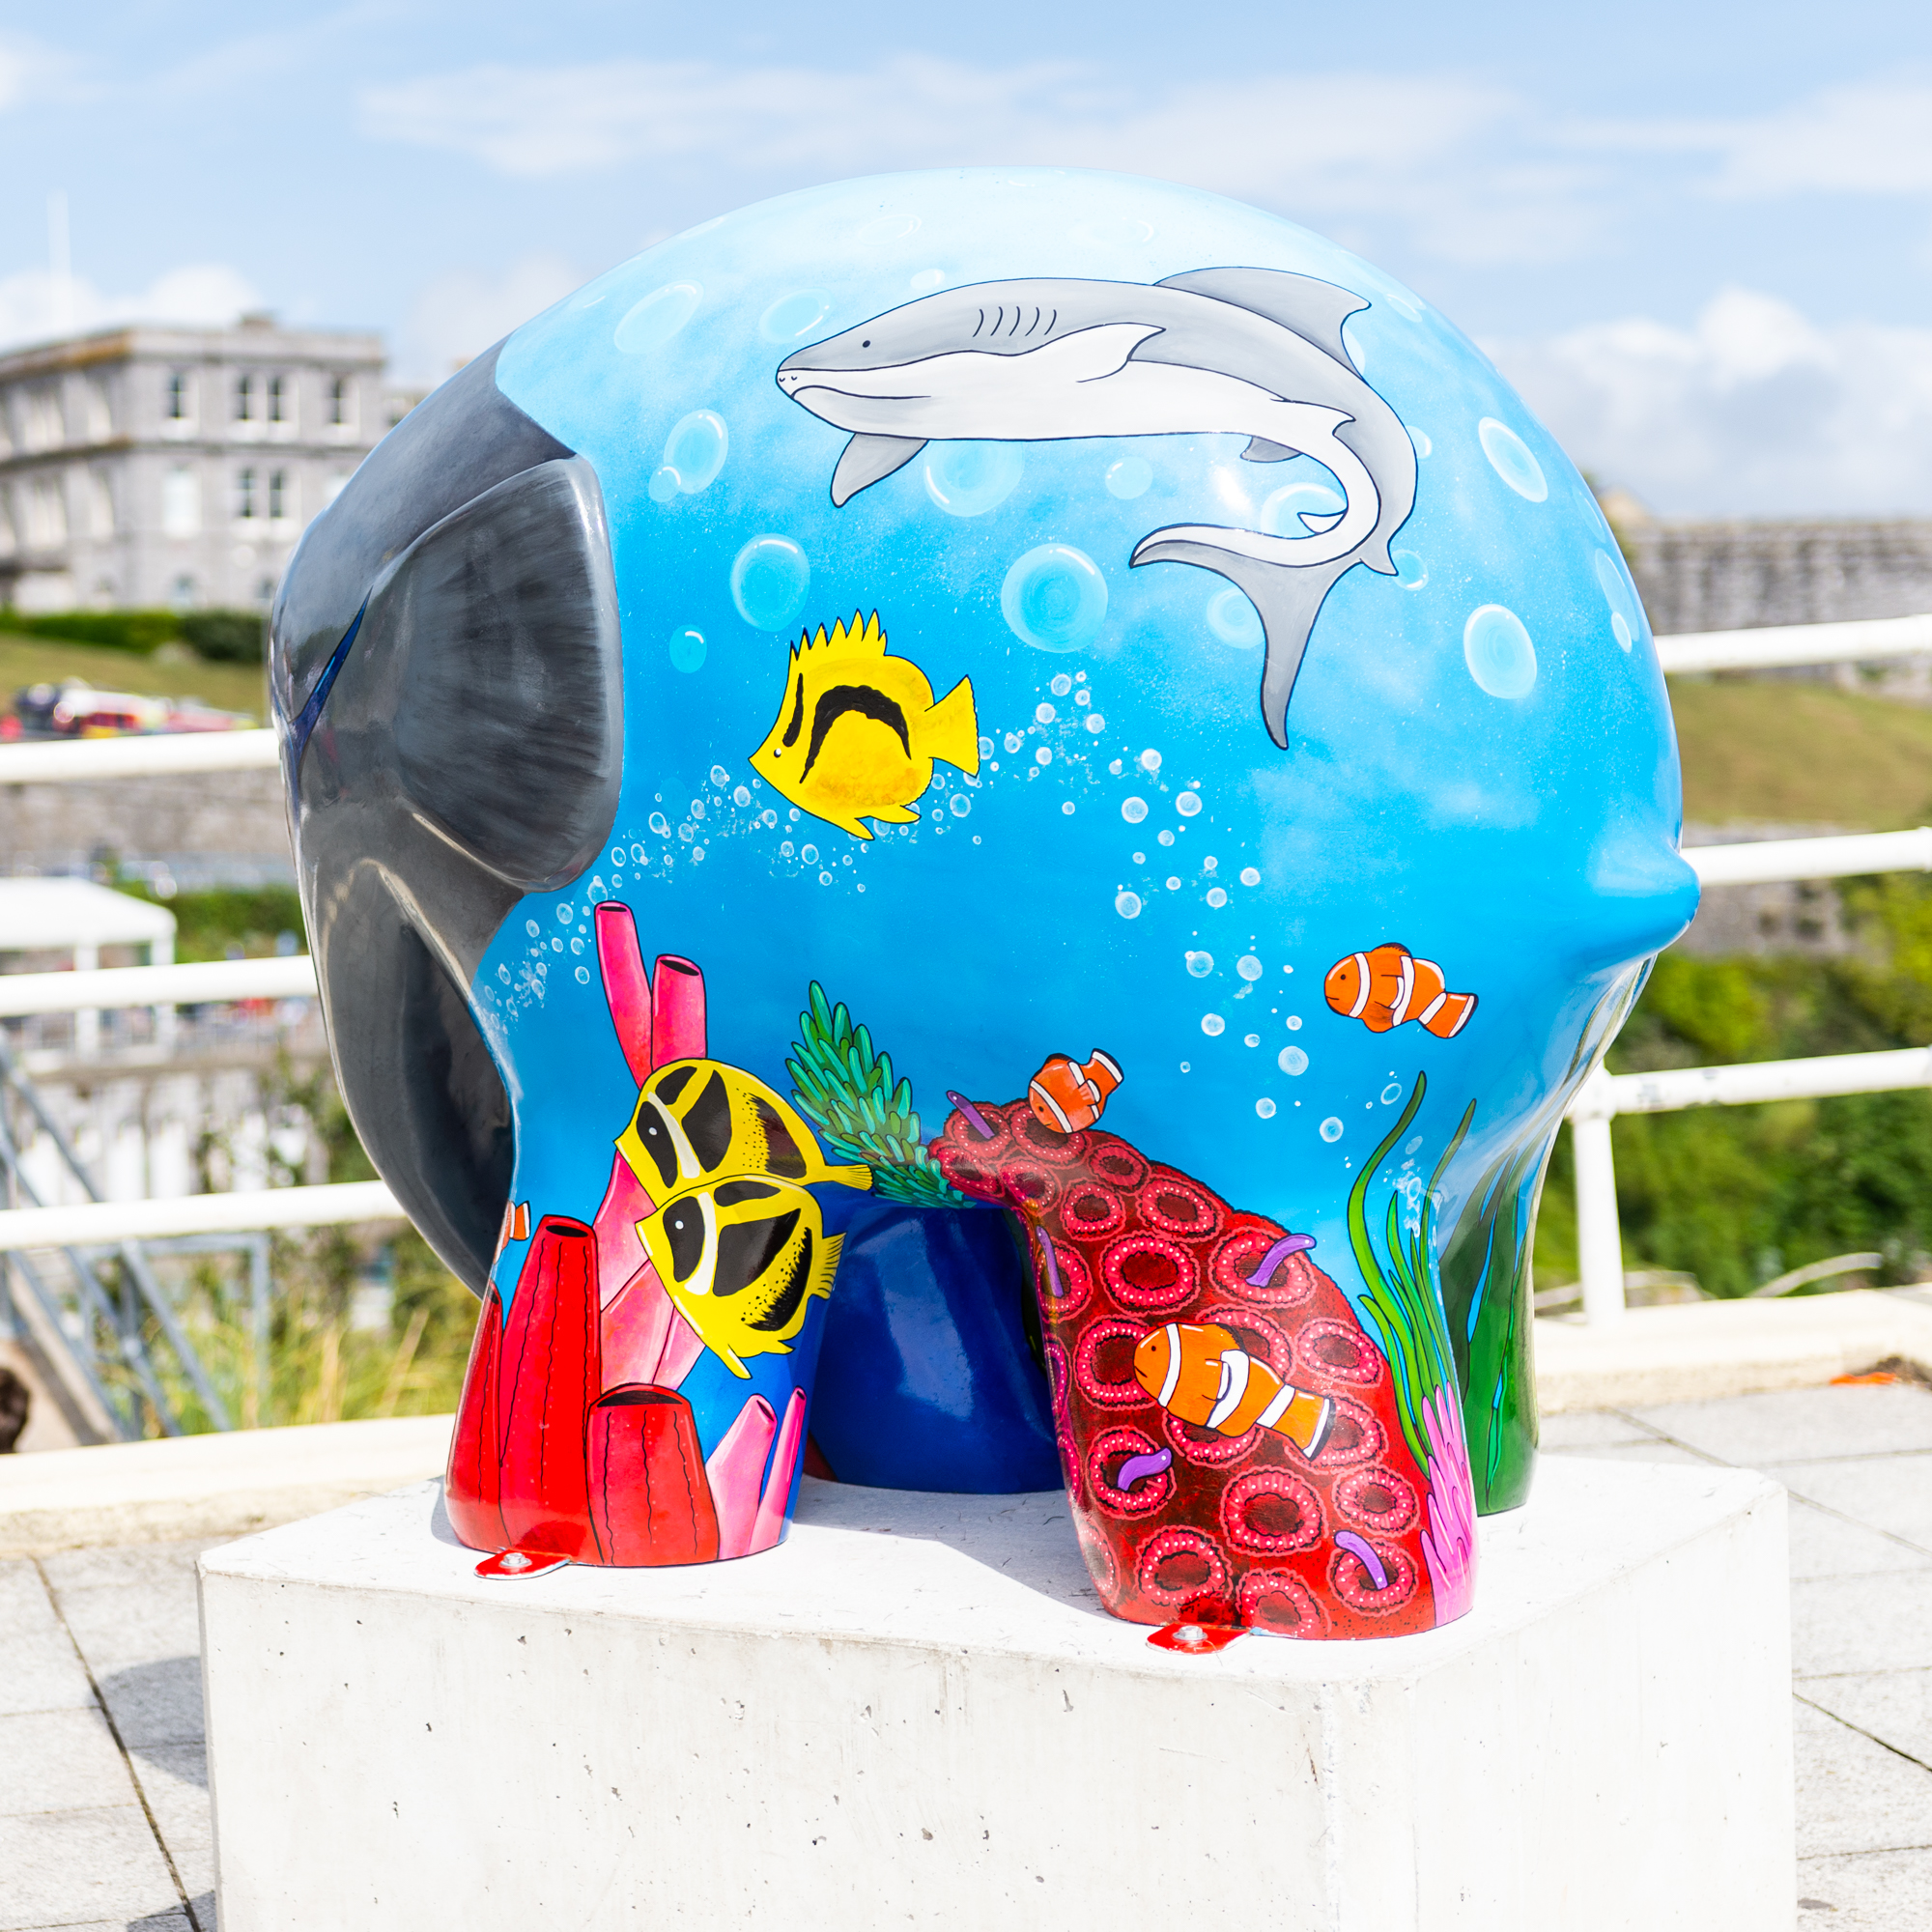 'Snorkelly' by Megan Heather Evans. Sponsored by Radio Plymouth - Image 4 of 11